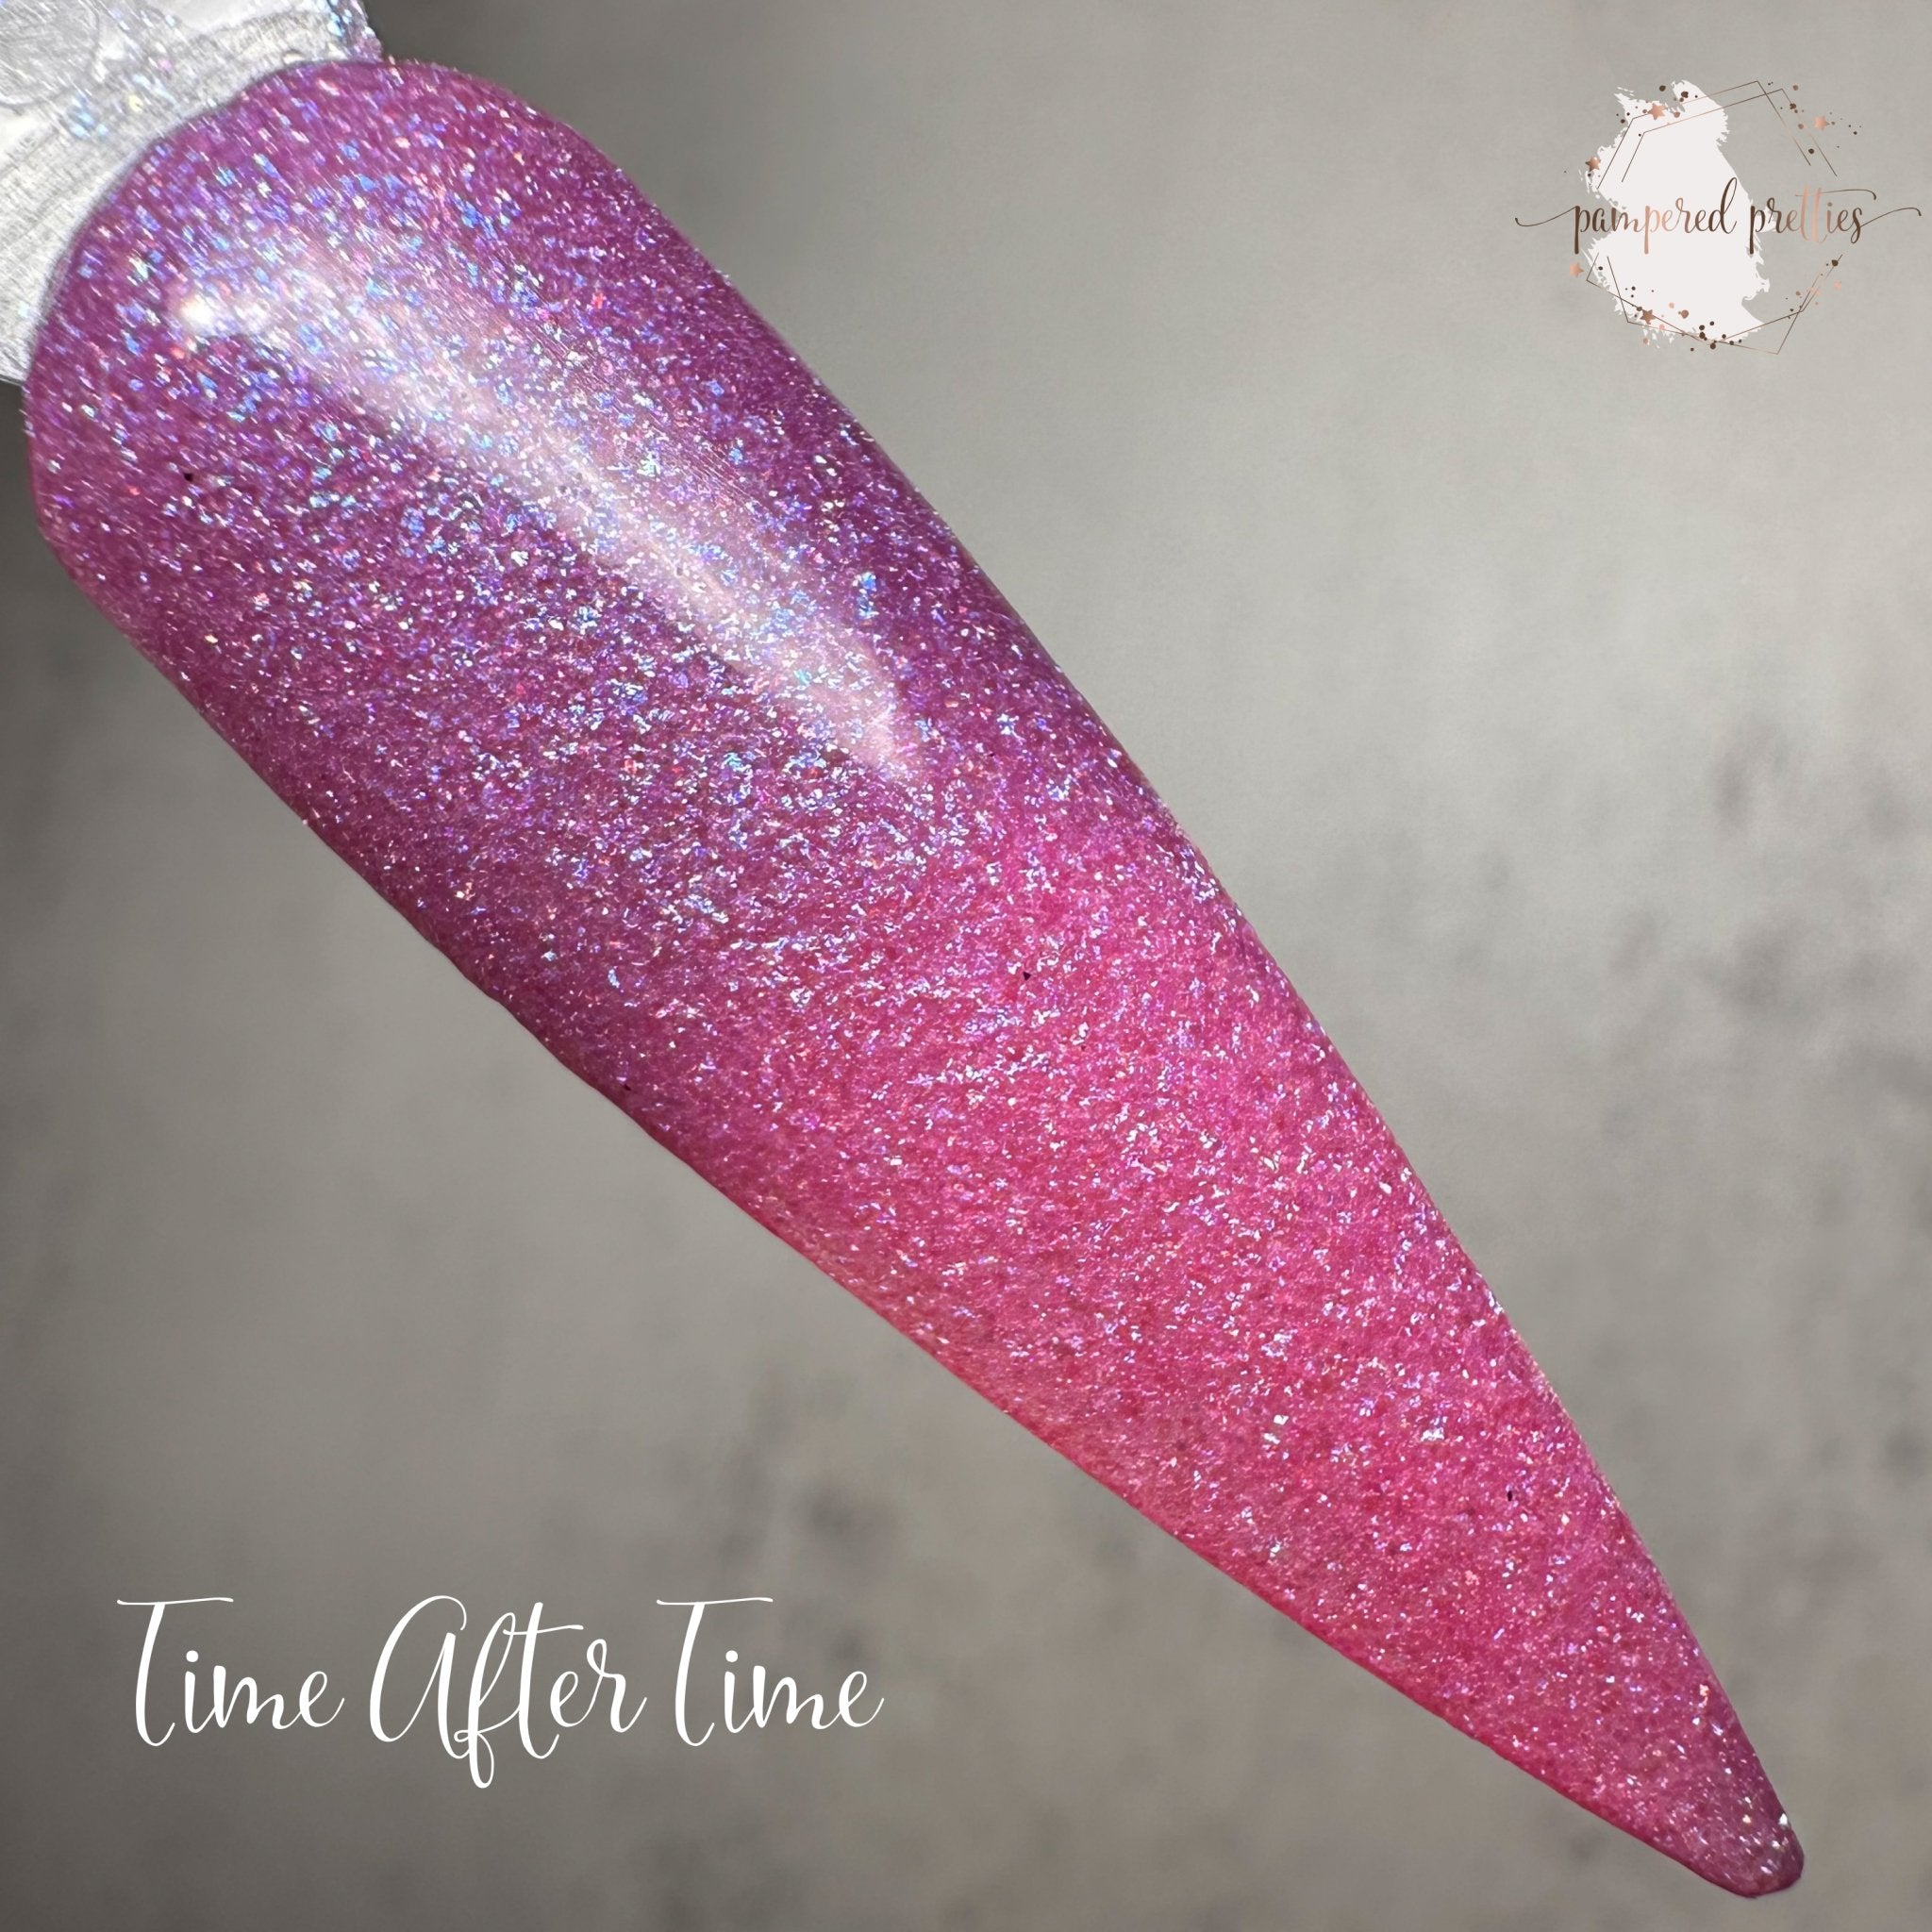 Time After Time - Pampered Pretties